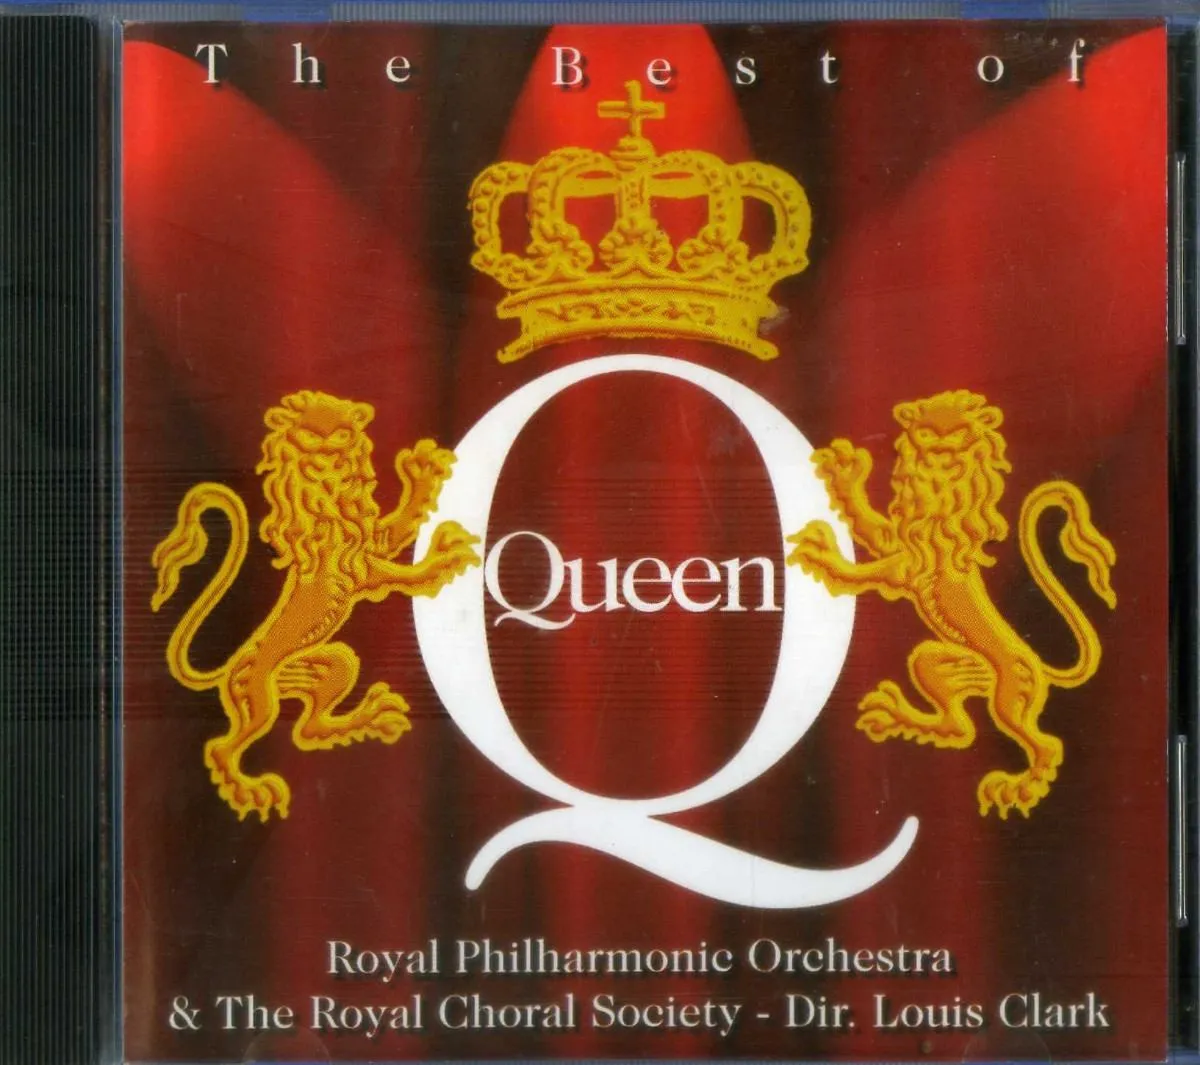 the-best-of-queen-royal-philharmonic-orchestra-cd-D_NQ_NP_5288-MLA4957753673_092013-F.webp